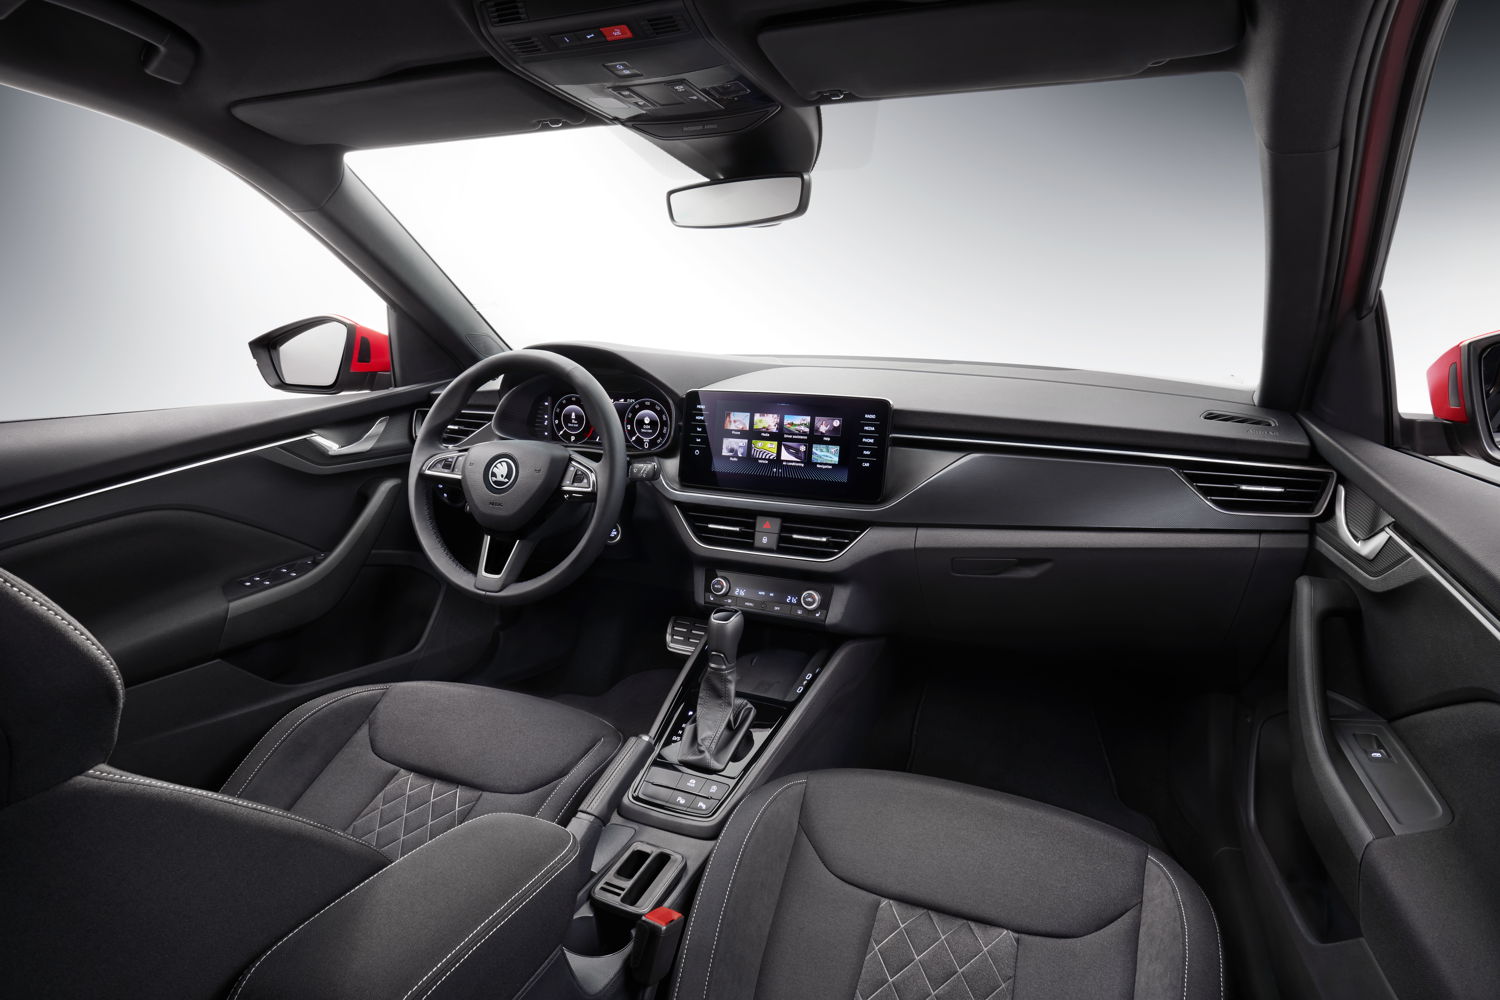 The interior of the ŠKODA KAMIQ is characterised by the new interior concept presented for the first time in the VISION RS study.